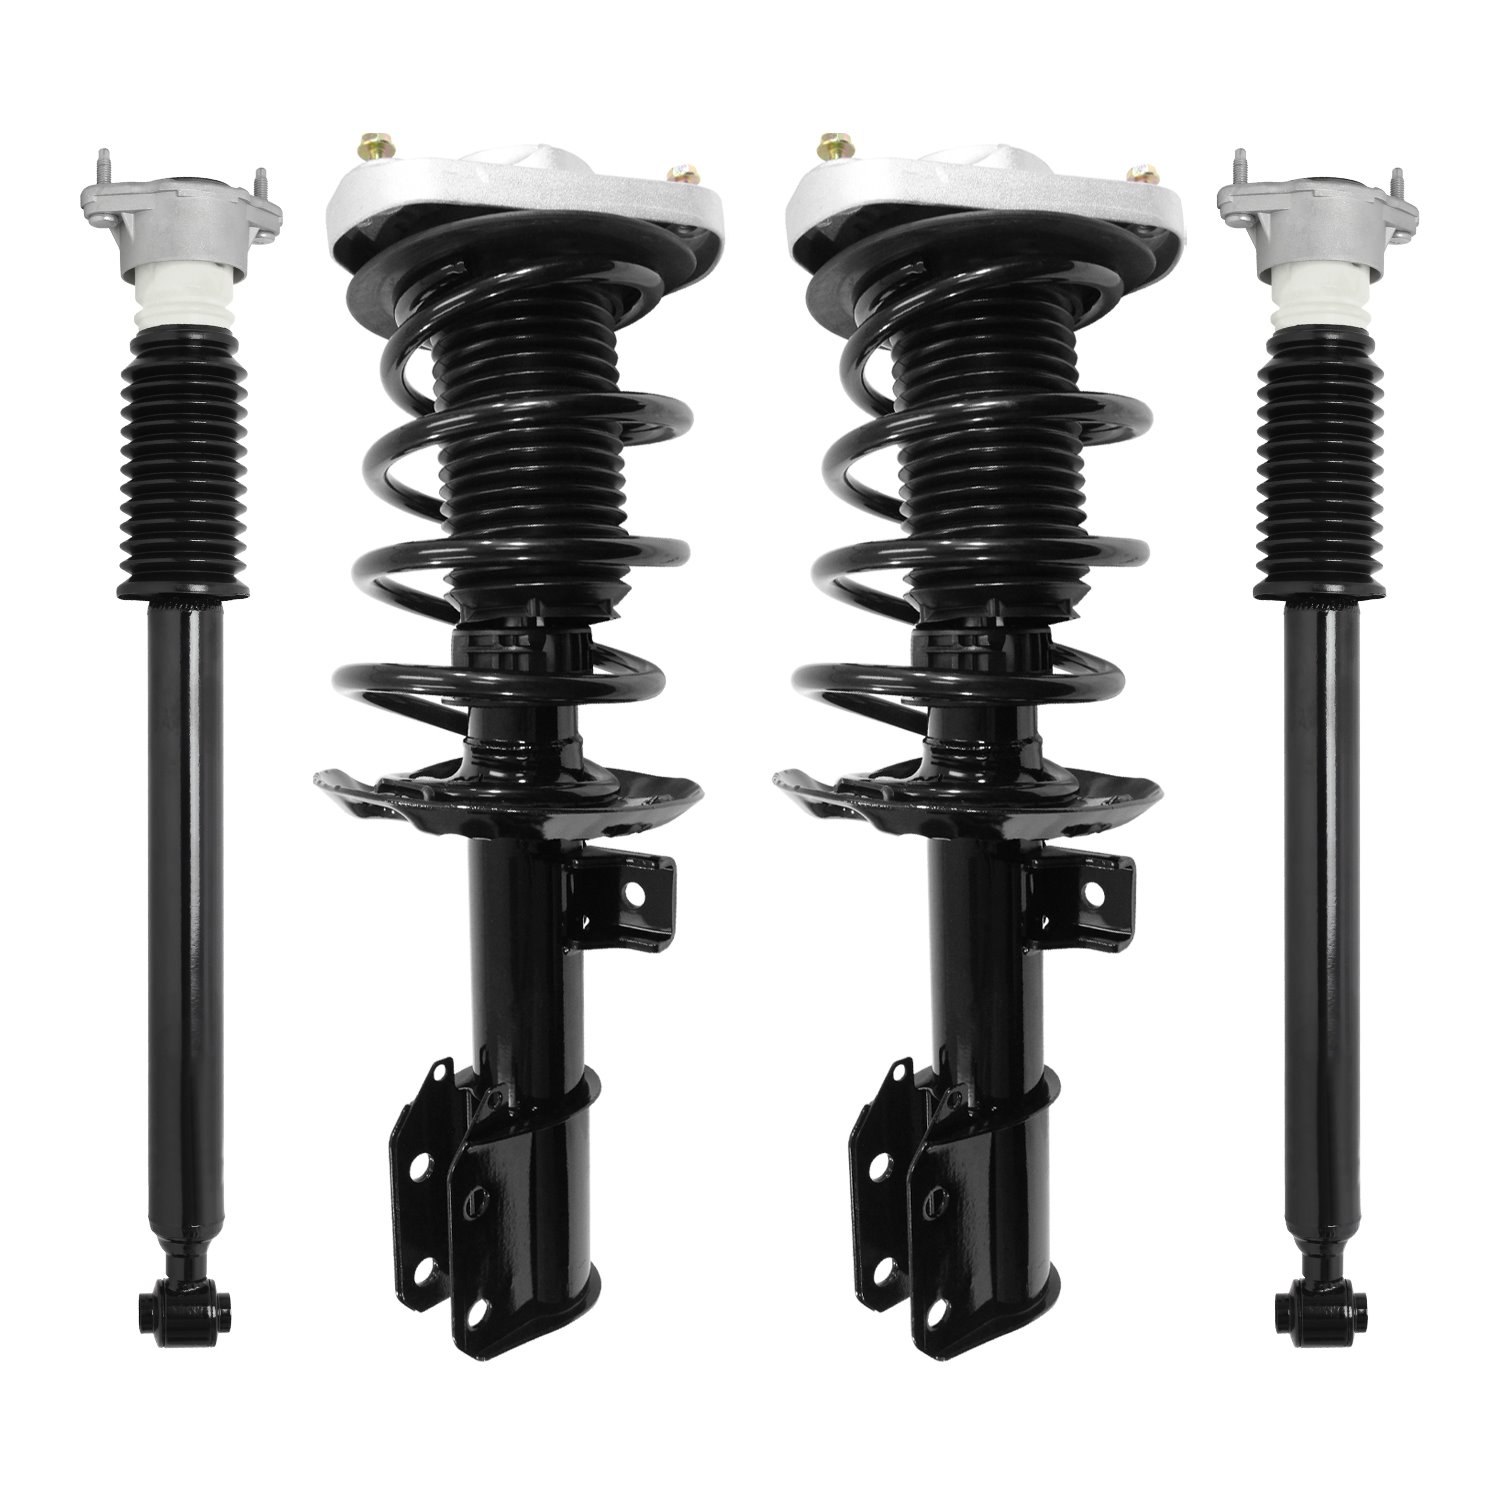 4-11810-254870-001 Front & Rear Suspension Strut & Coil Spring Assembly Fits Select Mercedes-Benz